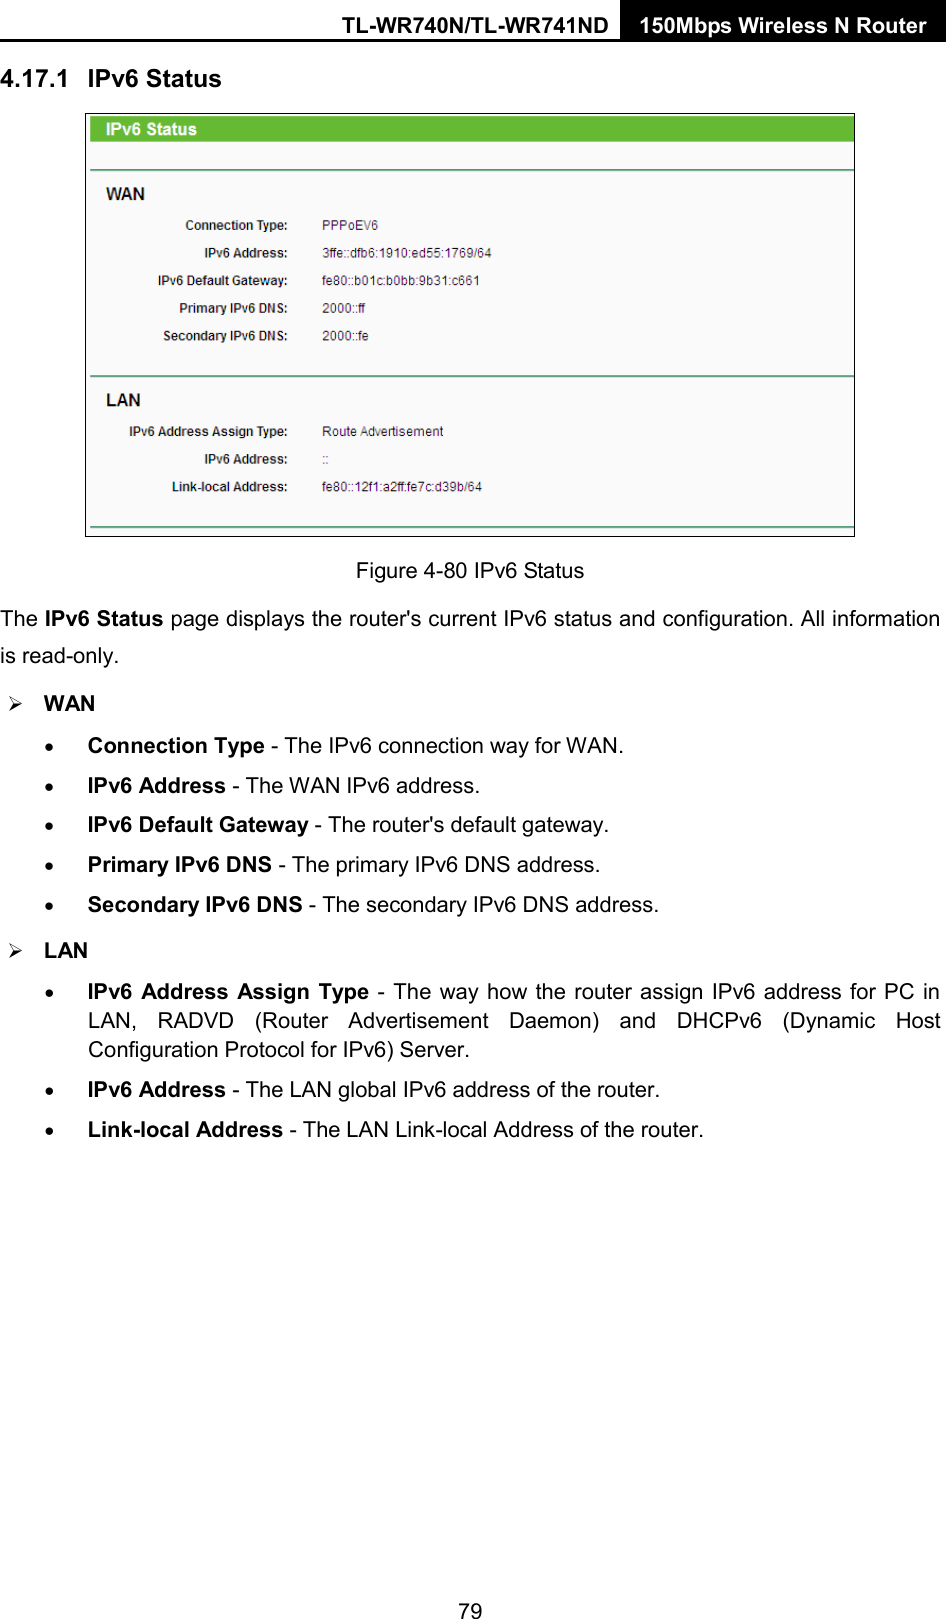 TL-WR740N/TL-WR741ND 150Mbps Wireless N Router  4.17.1 IPv6 Status  Figure 4-80 IPv6 Status The IPv6 Status page displays the router&apos;s current IPv6 status and configuration. All information is read-only.    WAN   • Connection Type - The IPv6 connection way for WAN. • IPv6 Address - The WAN IPv6 address. • IPv6 Default Gateway - The router&apos;s default gateway. • Primary IPv6 DNS - The primary IPv6 DNS address. • Secondary IPv6 DNS - The secondary IPv6 DNS address.  LAN • IPv6 Address Assign Type - The way how the router assign IPv6 address for PC in LAN, RADVD (Router Advertisement Daemon) and DHCPv6 (Dynamic Host Configuration Protocol for IPv6) Server. • IPv6 Address - The LAN global IPv6 address of the router. • Link-local Address - The LAN Link-local Address of the router. 79 